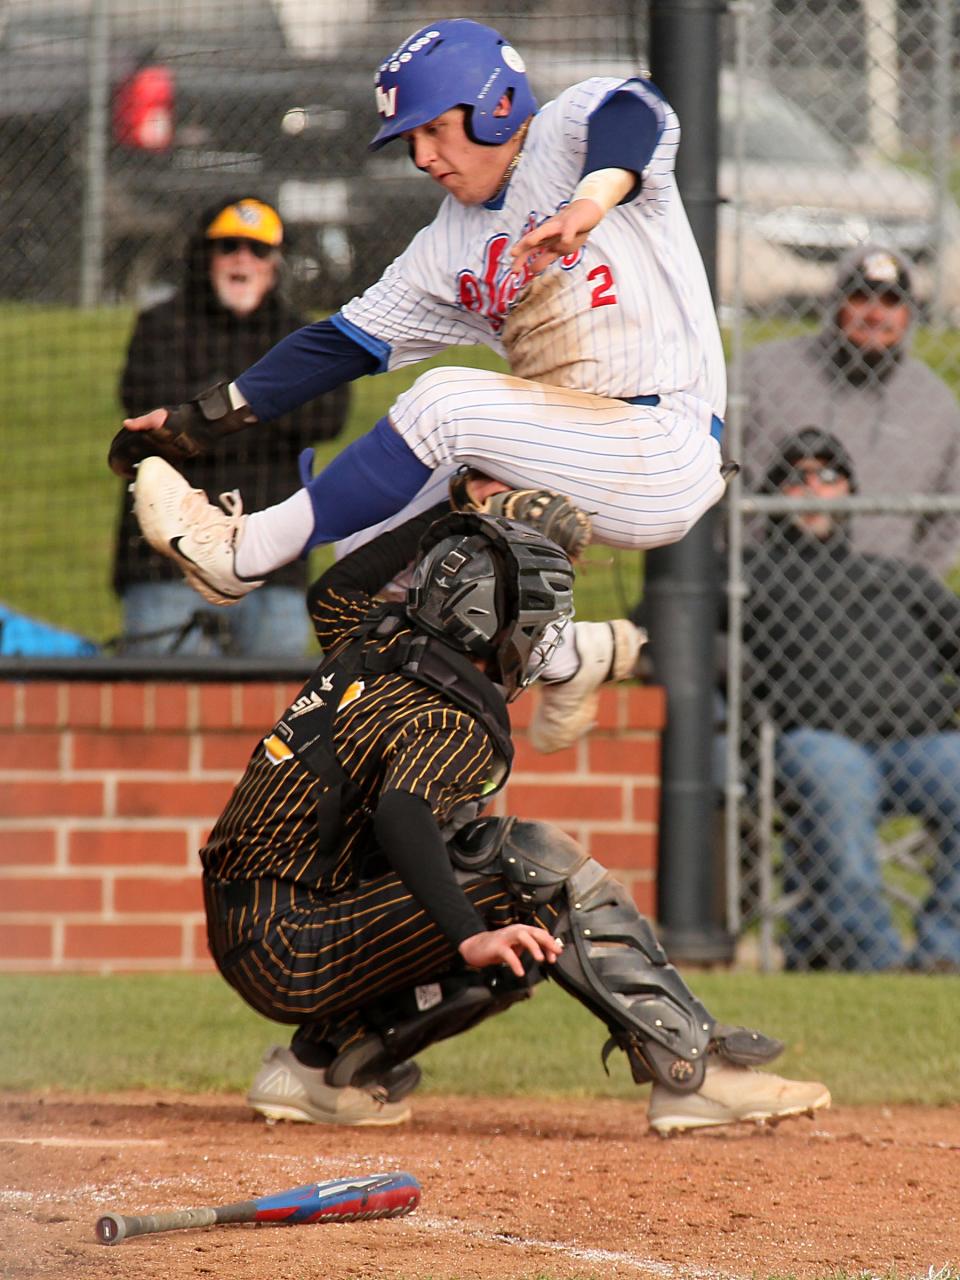 Watkins Memorial's Andrew Botts tags out Licking Valley's Theo Walsh, preventing the tying run from scoring on Monday.